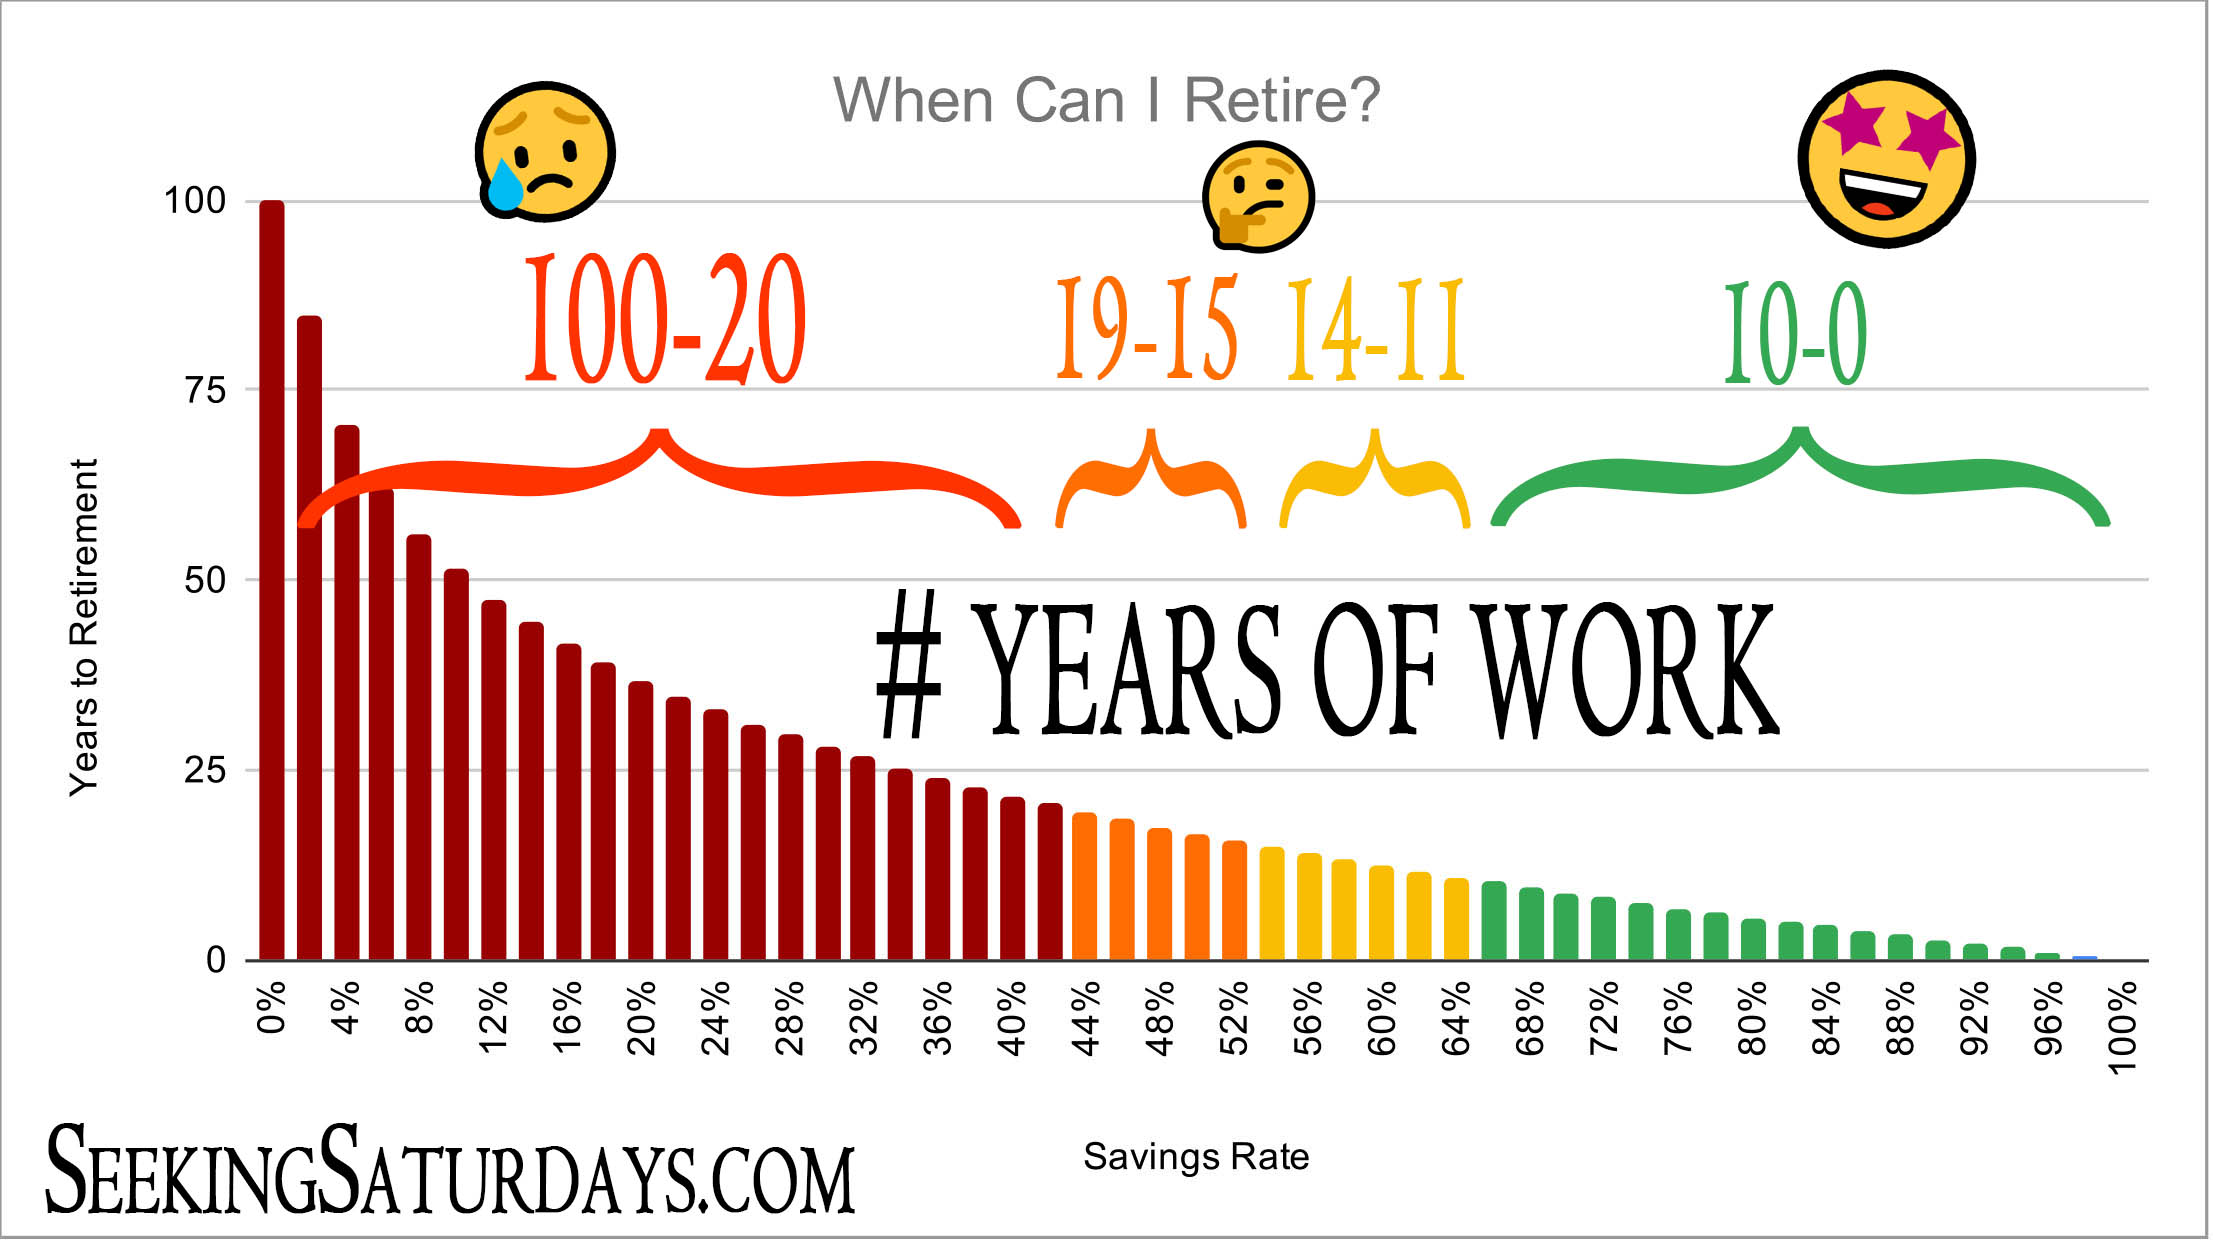 How to Retire Early, Early Retirement, Financial Independence, FIRE